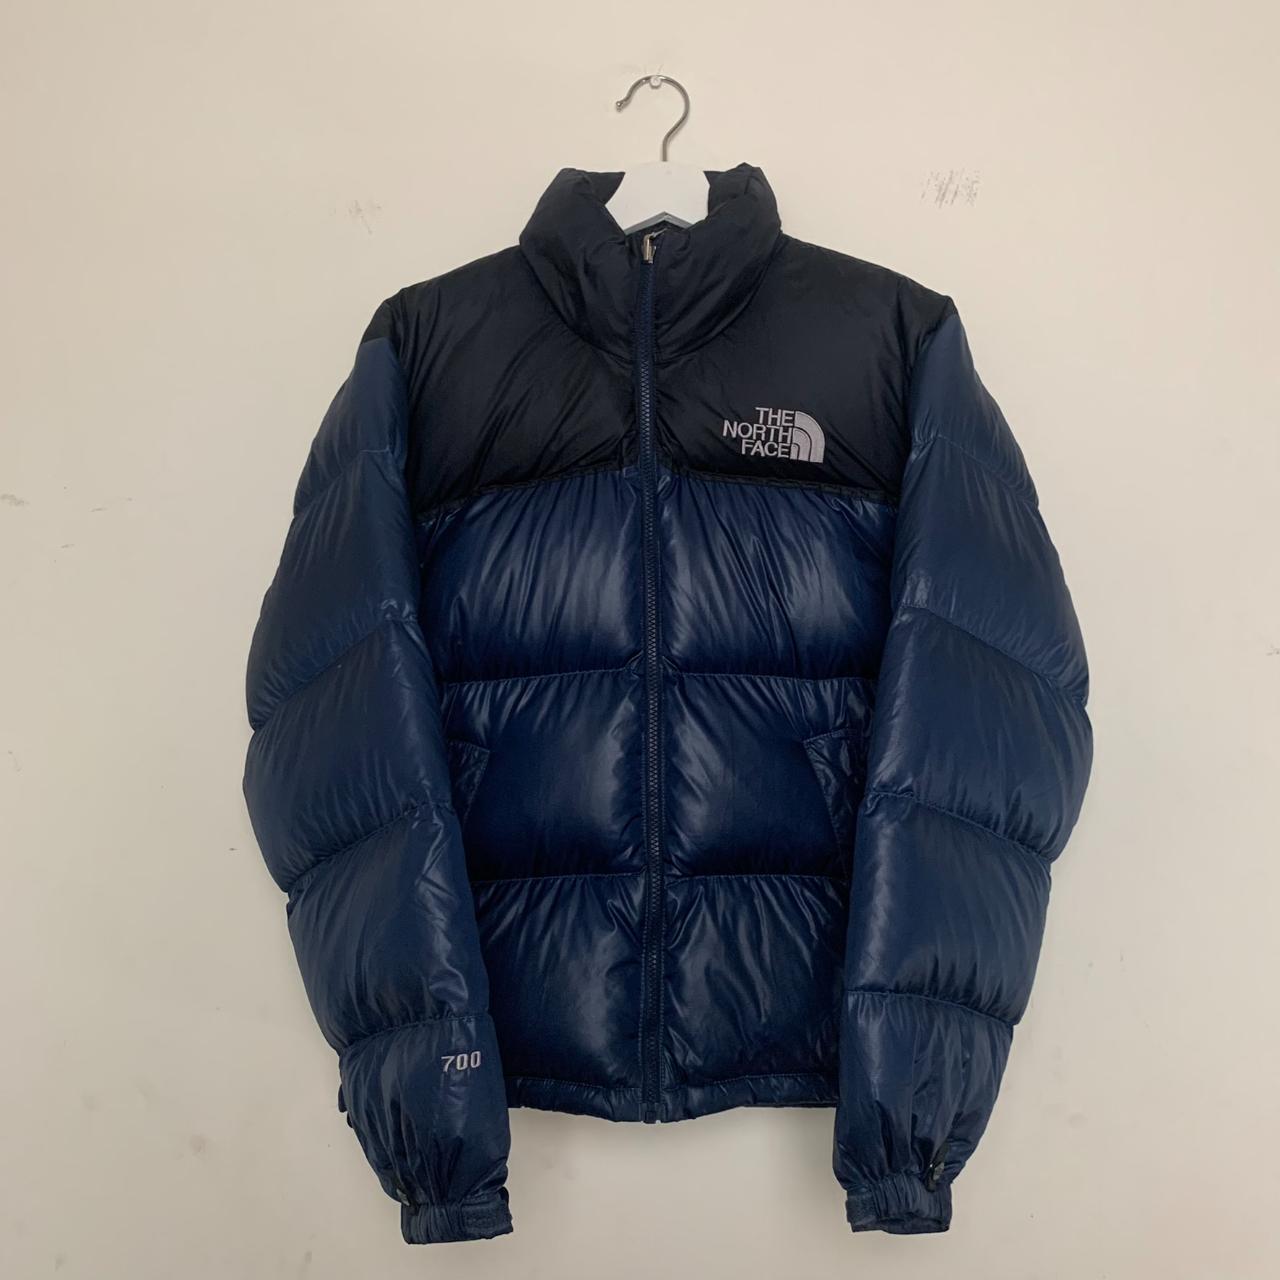 The North Face Men's Blue and Navy | Depop